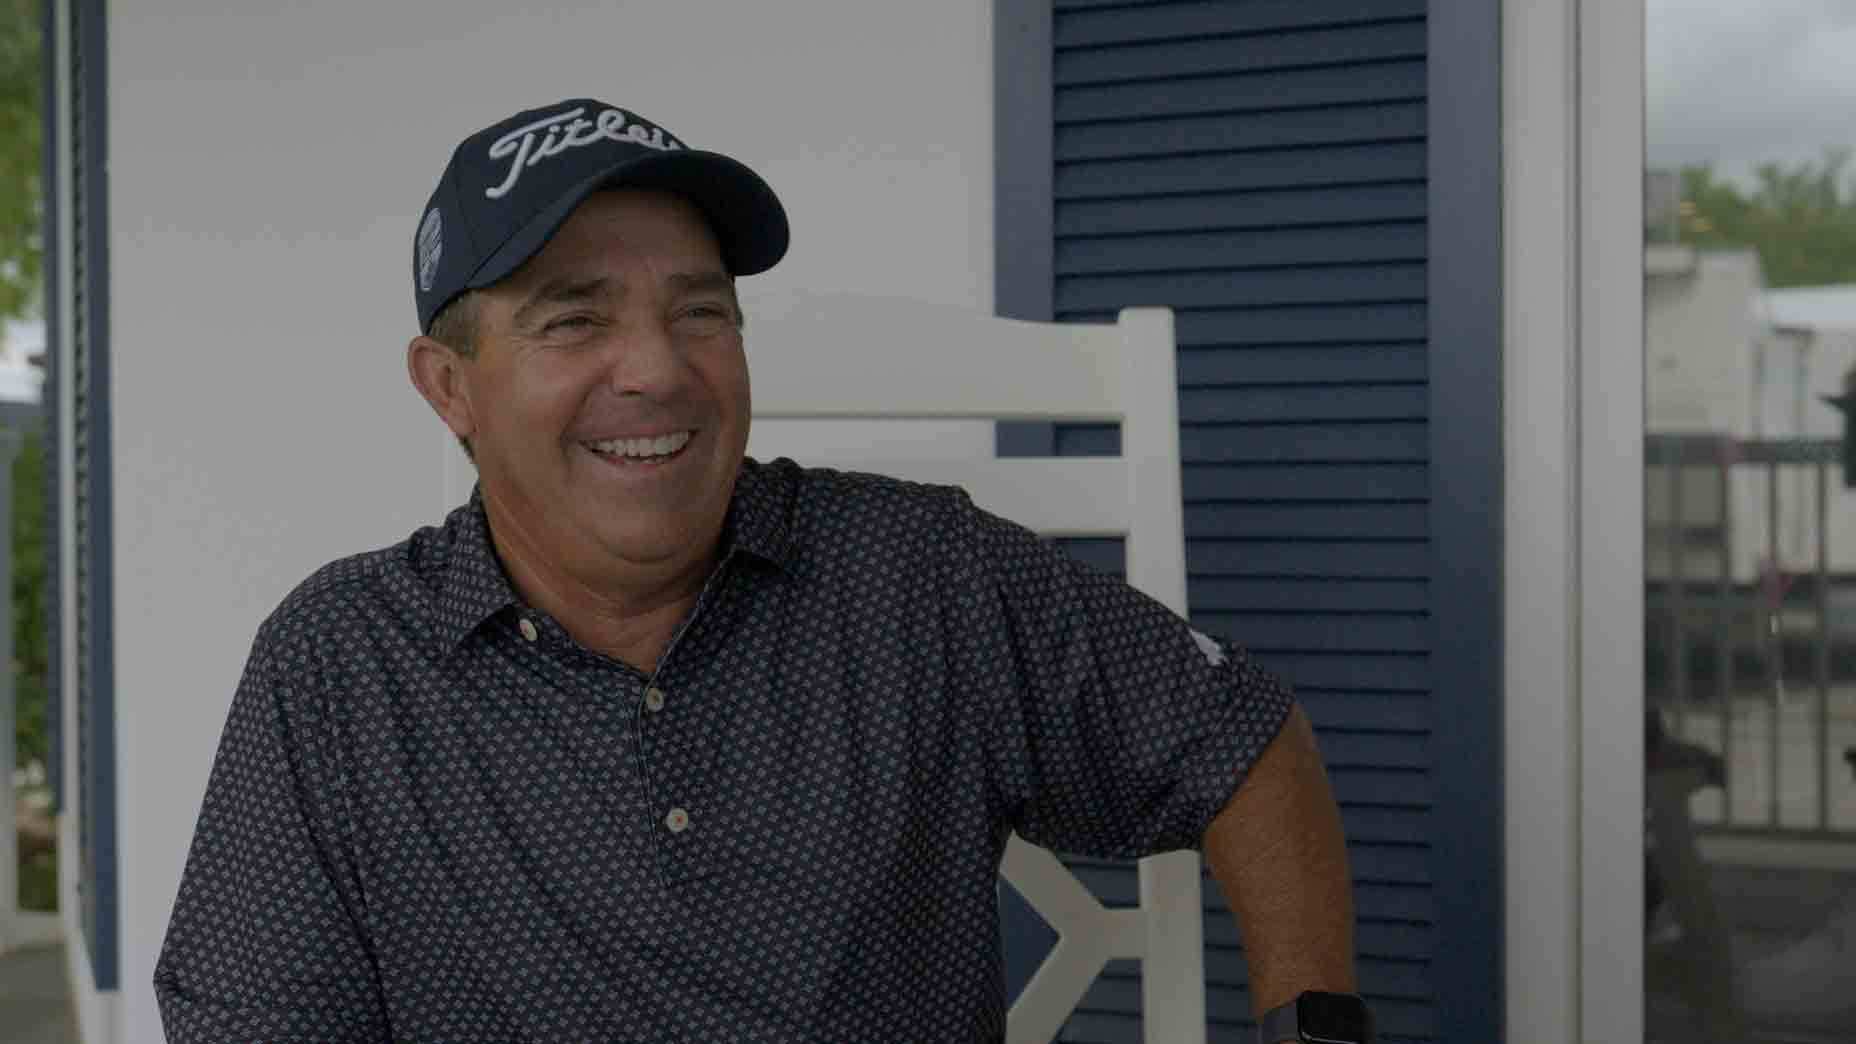 He's 61. He quit for 20 years. And he's playing the PGA Championship